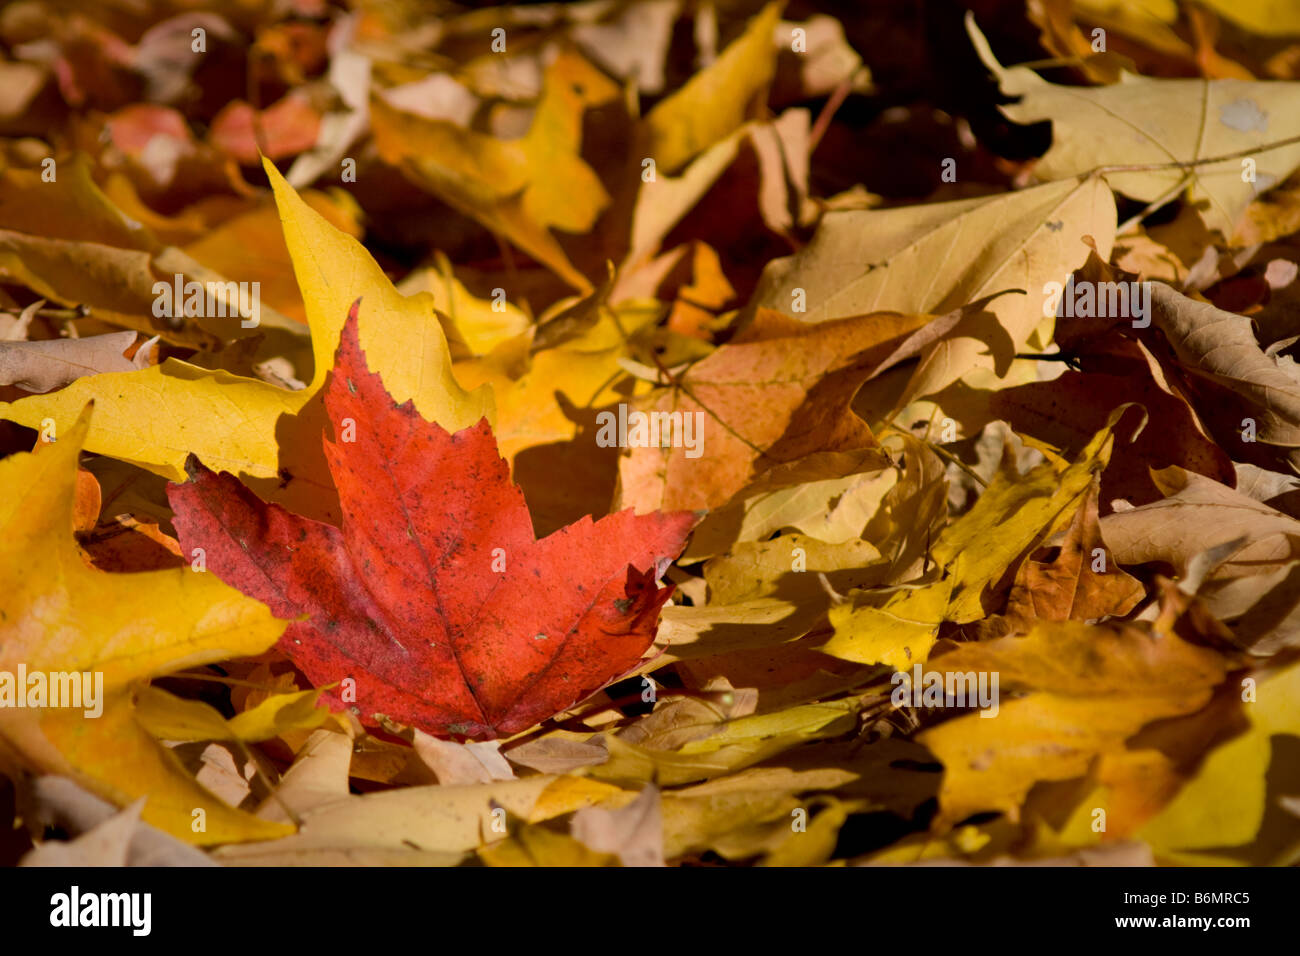 Red Maple leaf resting on a bed of yellow. Stock Photo